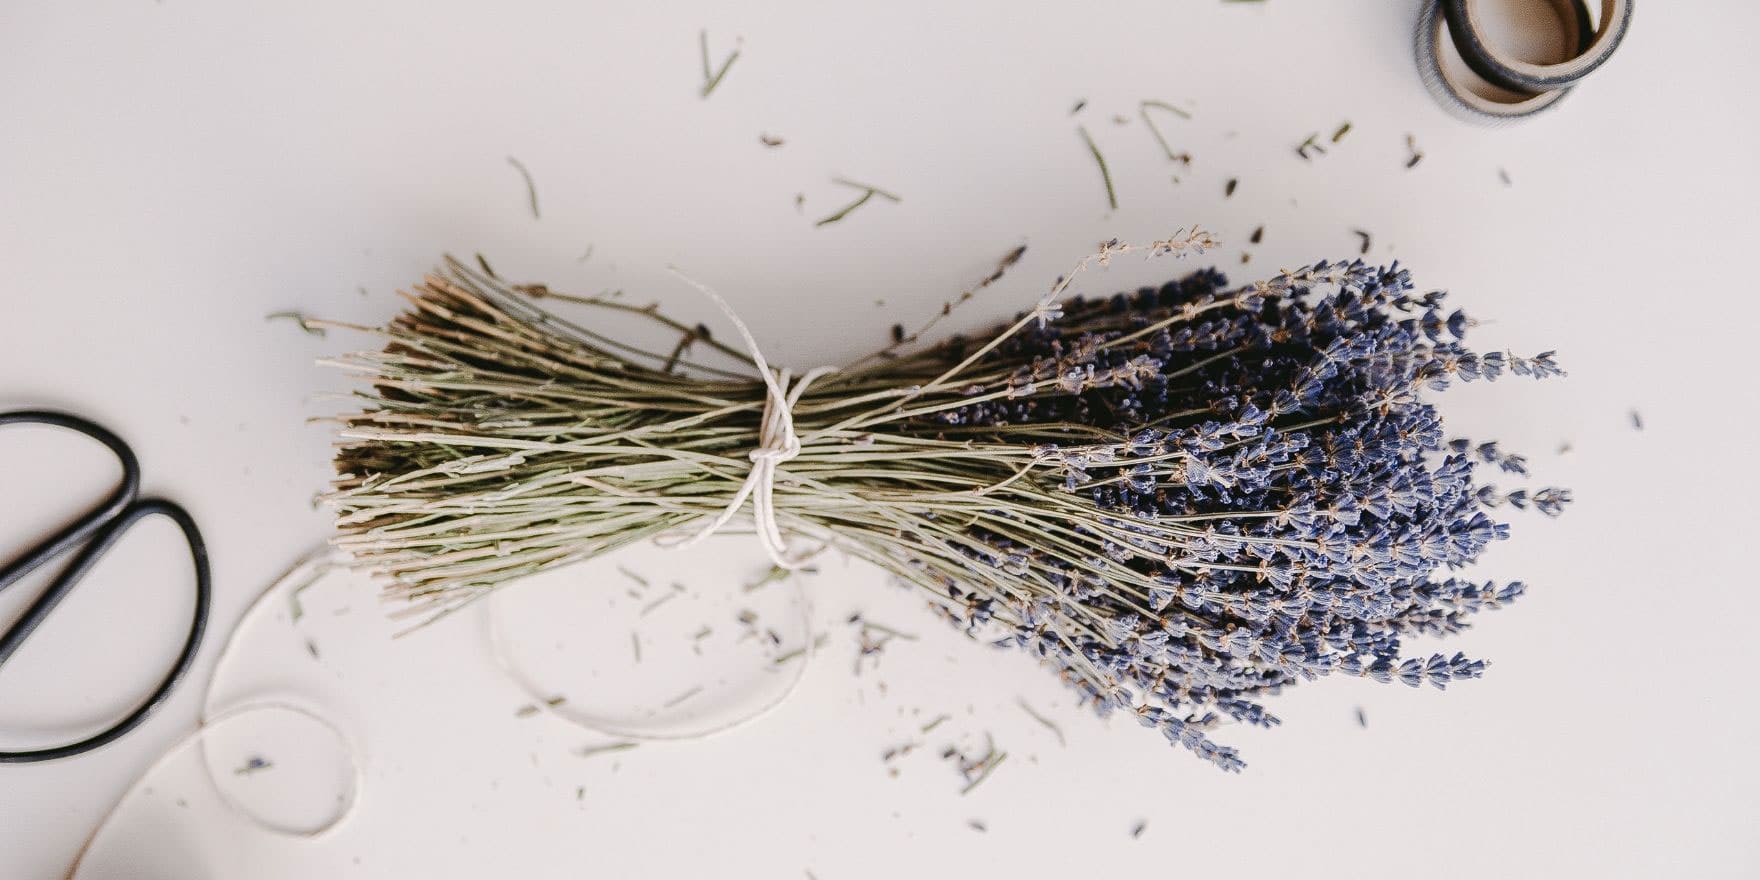 A neatly tied bundle of lavender with sprigs of lavender scattered around on a white surface, accompanied by a pair of scissors and spools of thread to the sides, suggestive of a witchy craft or